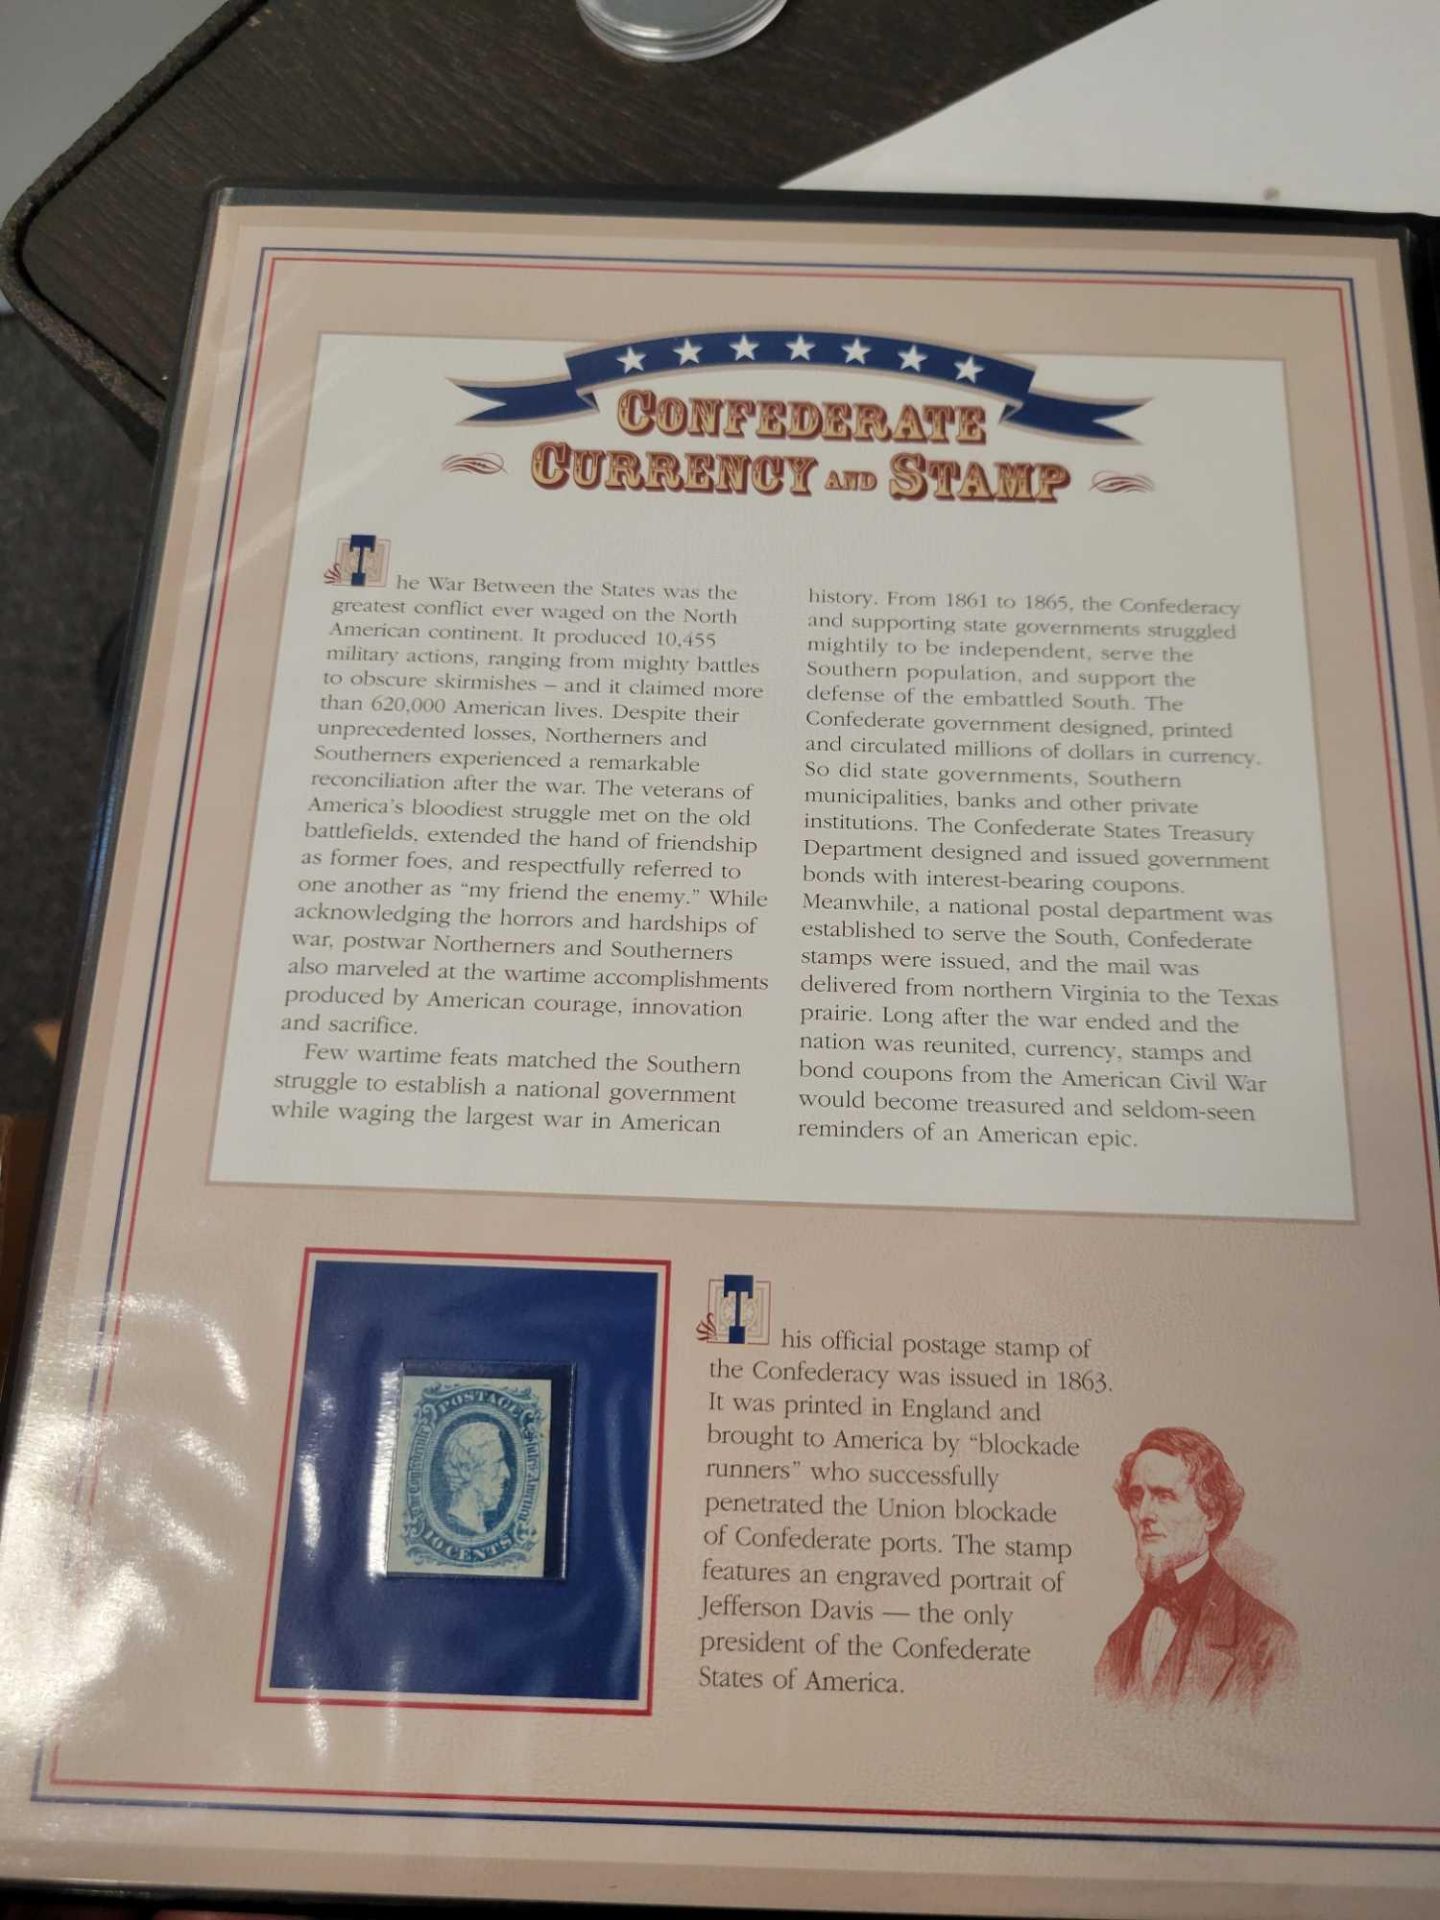 confederate currency and stamp booklet - Image 2 of 8